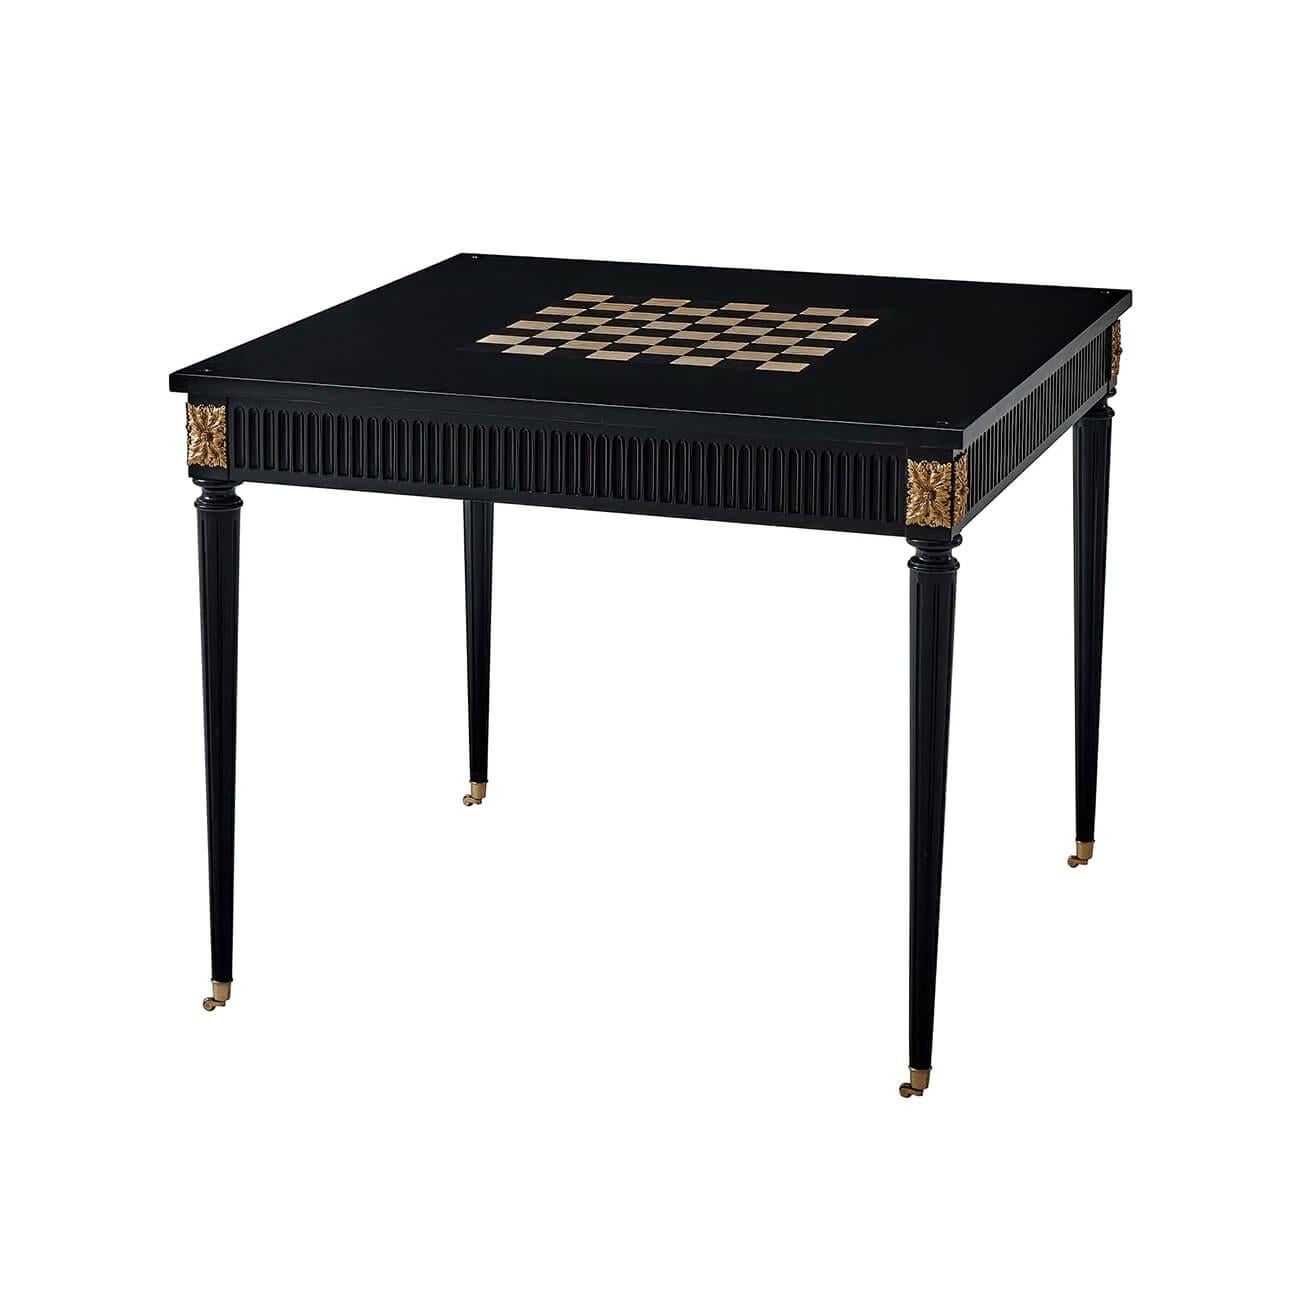 A Louis XVI style ebonized square game table with a tooled leather top reversible to expose the chessboard, with a carved fluted frieze and brass acanthus mounts and raised on turned and flited legs with brass casters.

Dimensions: 36